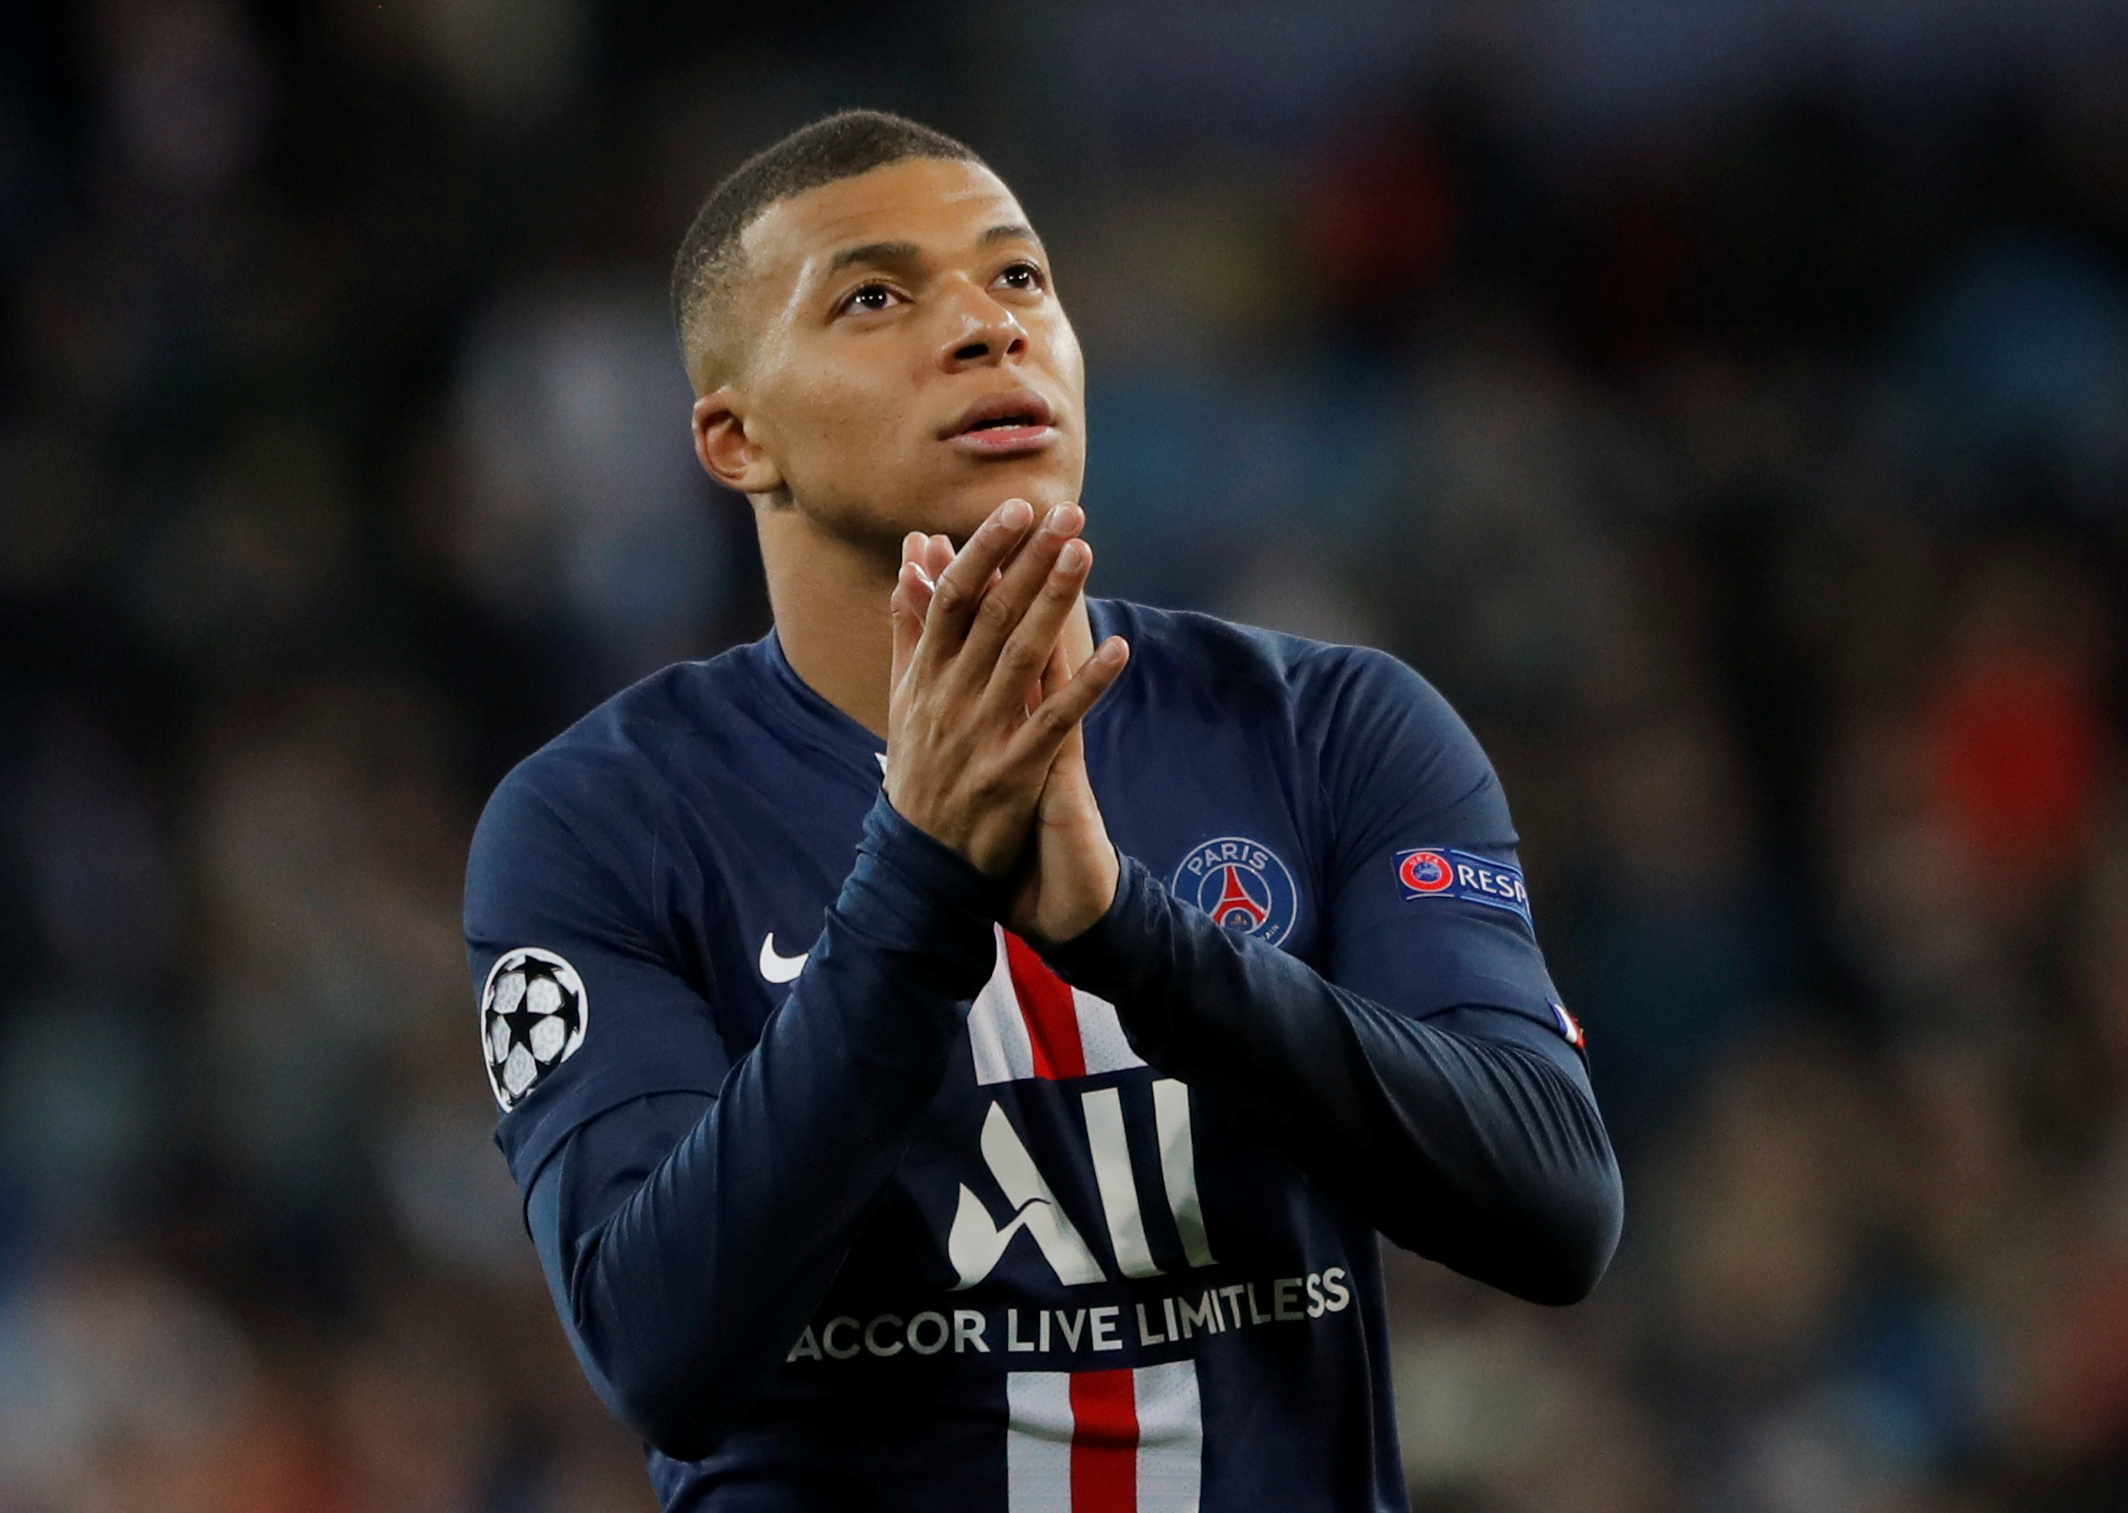 What is Mbappe net worth?